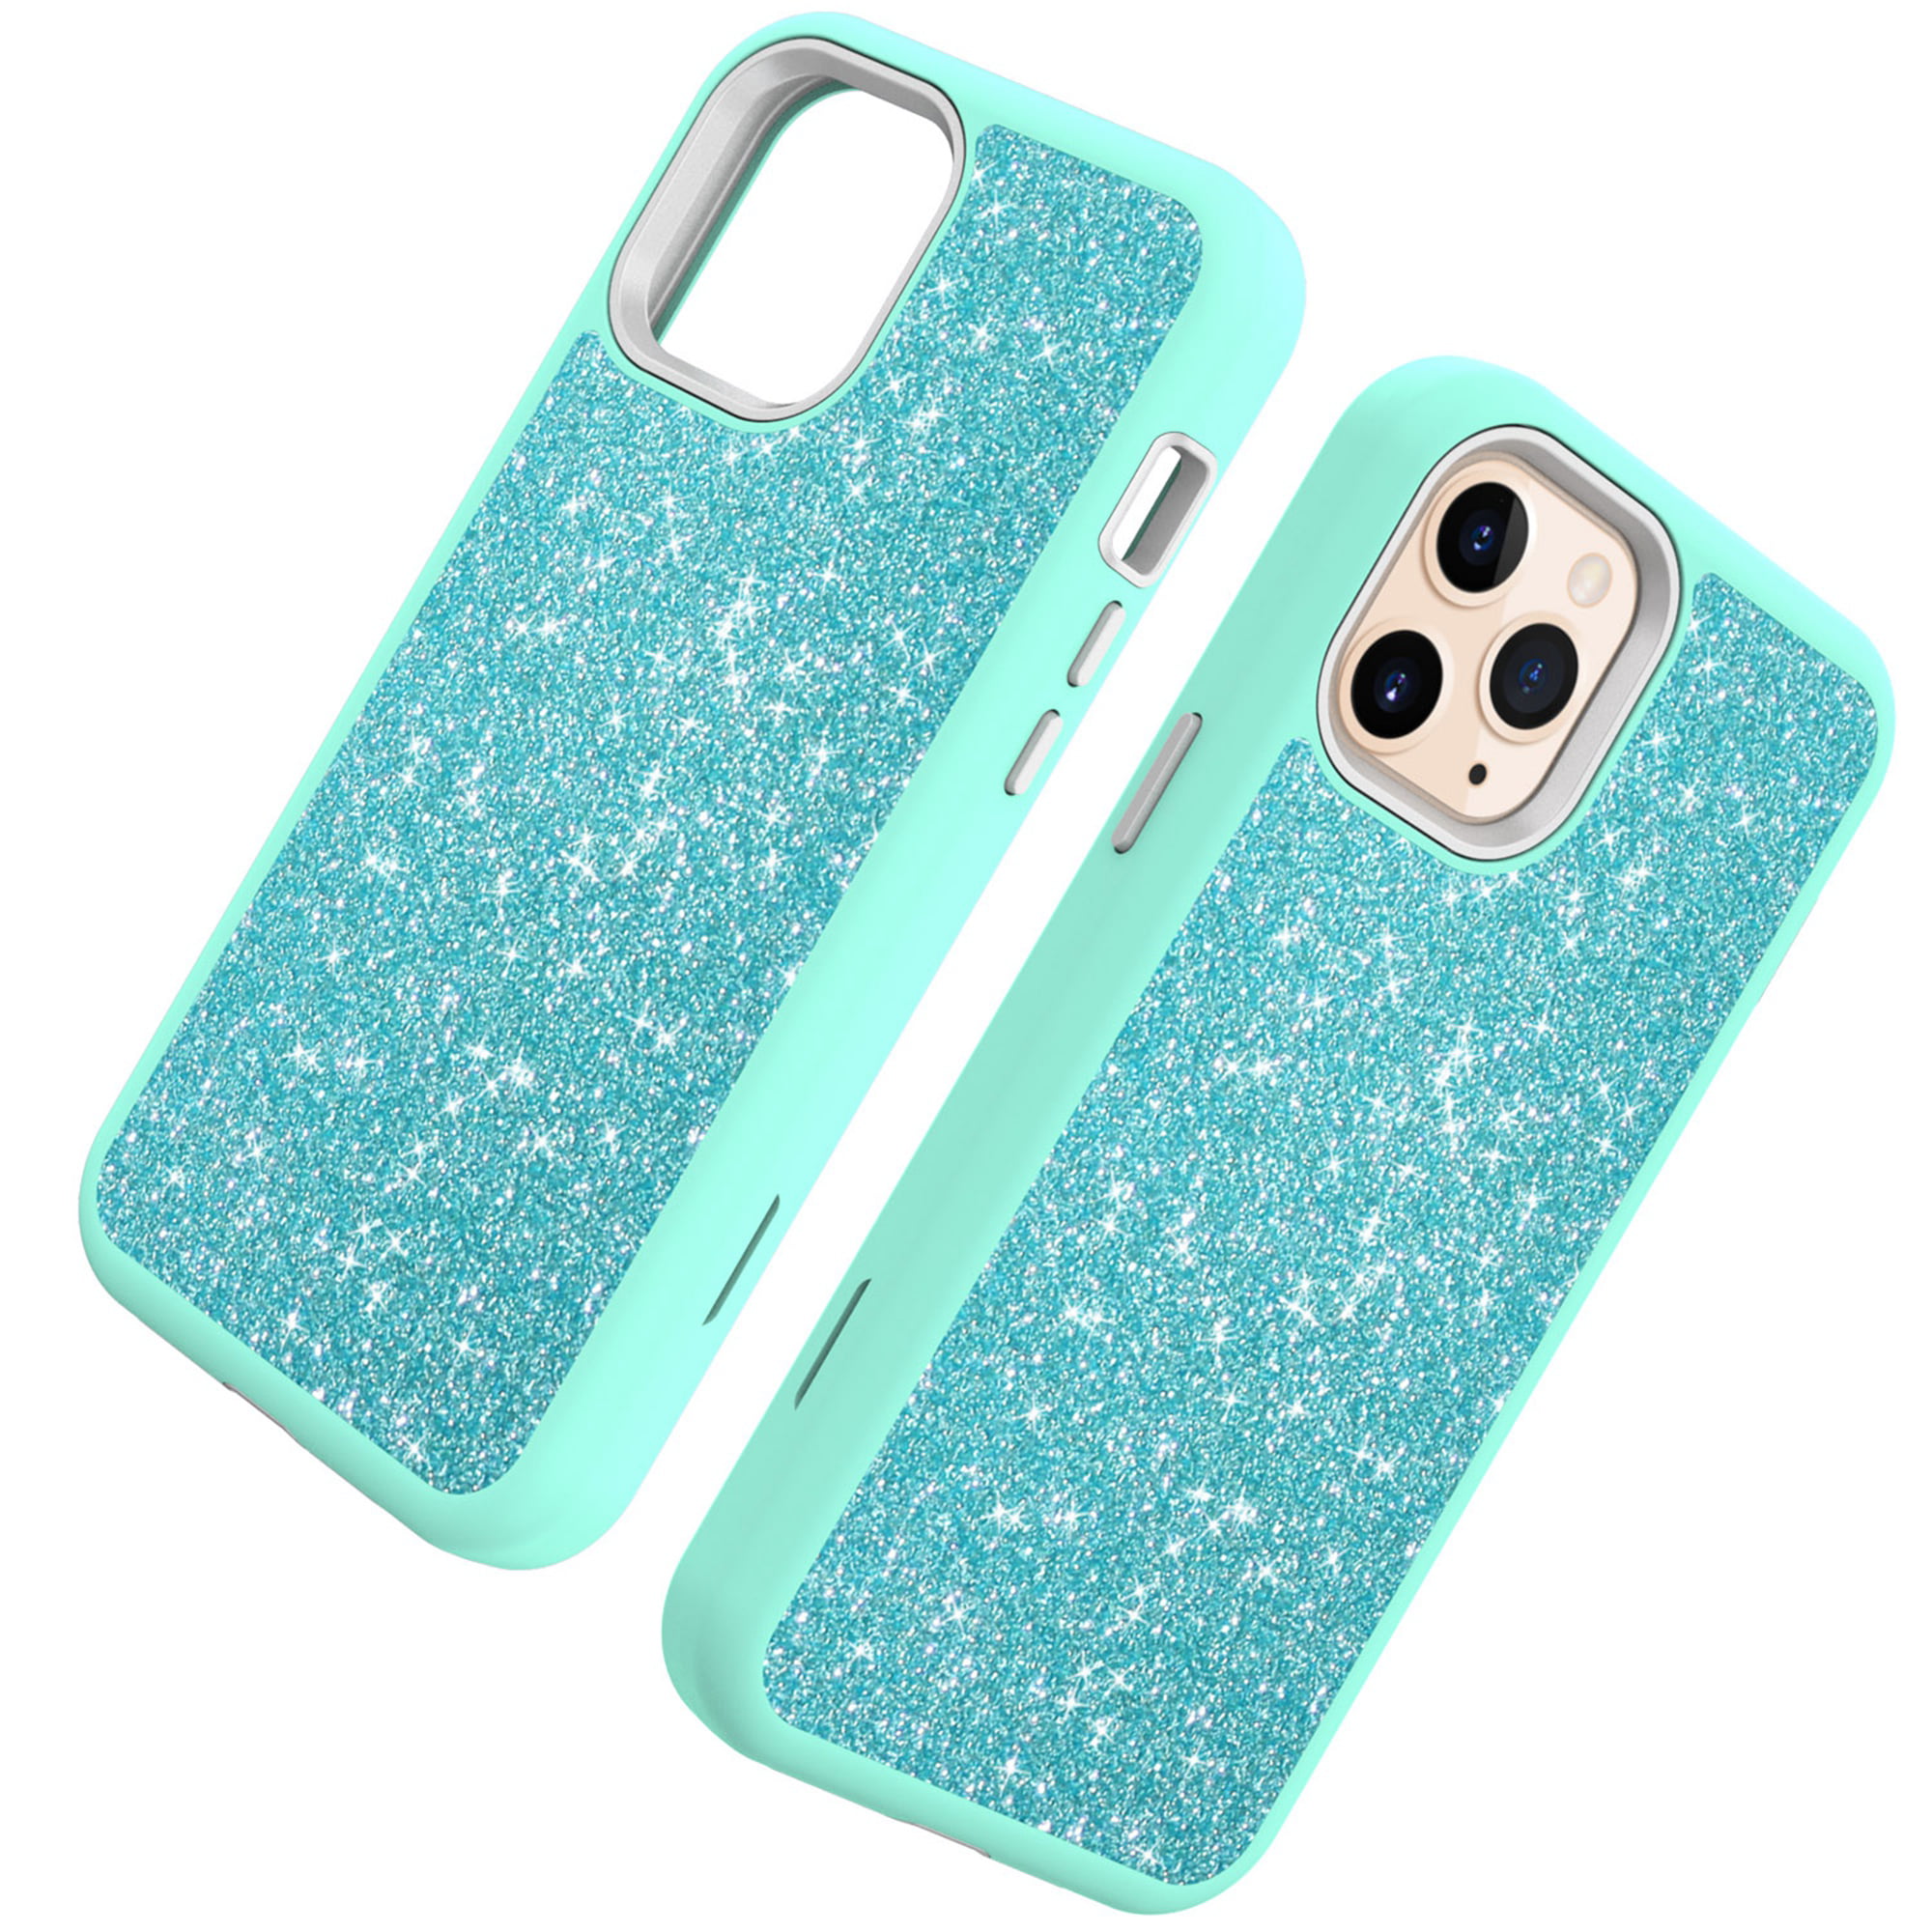 Muntonski Compatible with iPhone 12 Pro Max case 2020 Square Trunk Cute bee  Bling Rectangle Glitter 12promax Phone Cover 12max Girly Luxury Bumper for